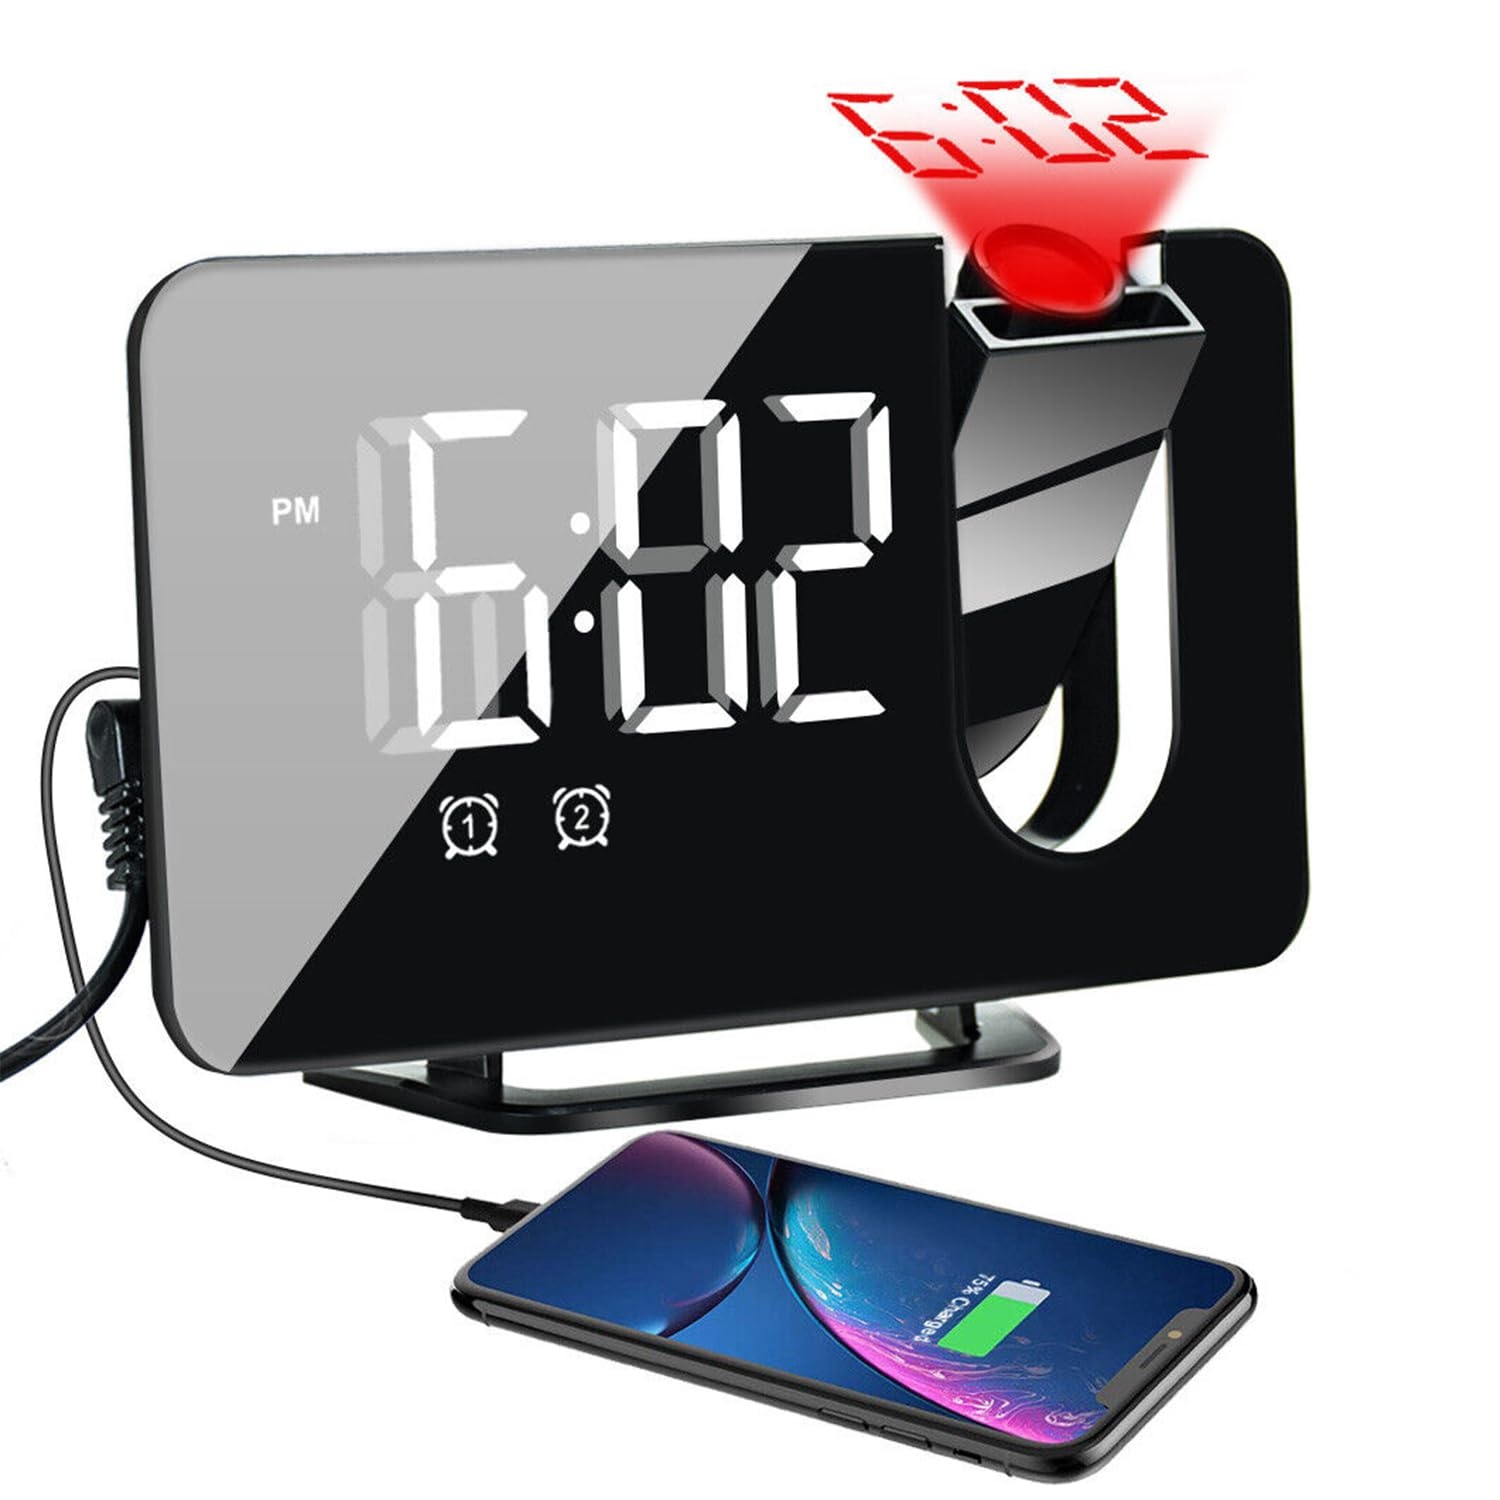 Digital FM Alarm Clock LED Large Display with Snooze Mirror Projection Screen Temperature Detect for Bedroom, Desk